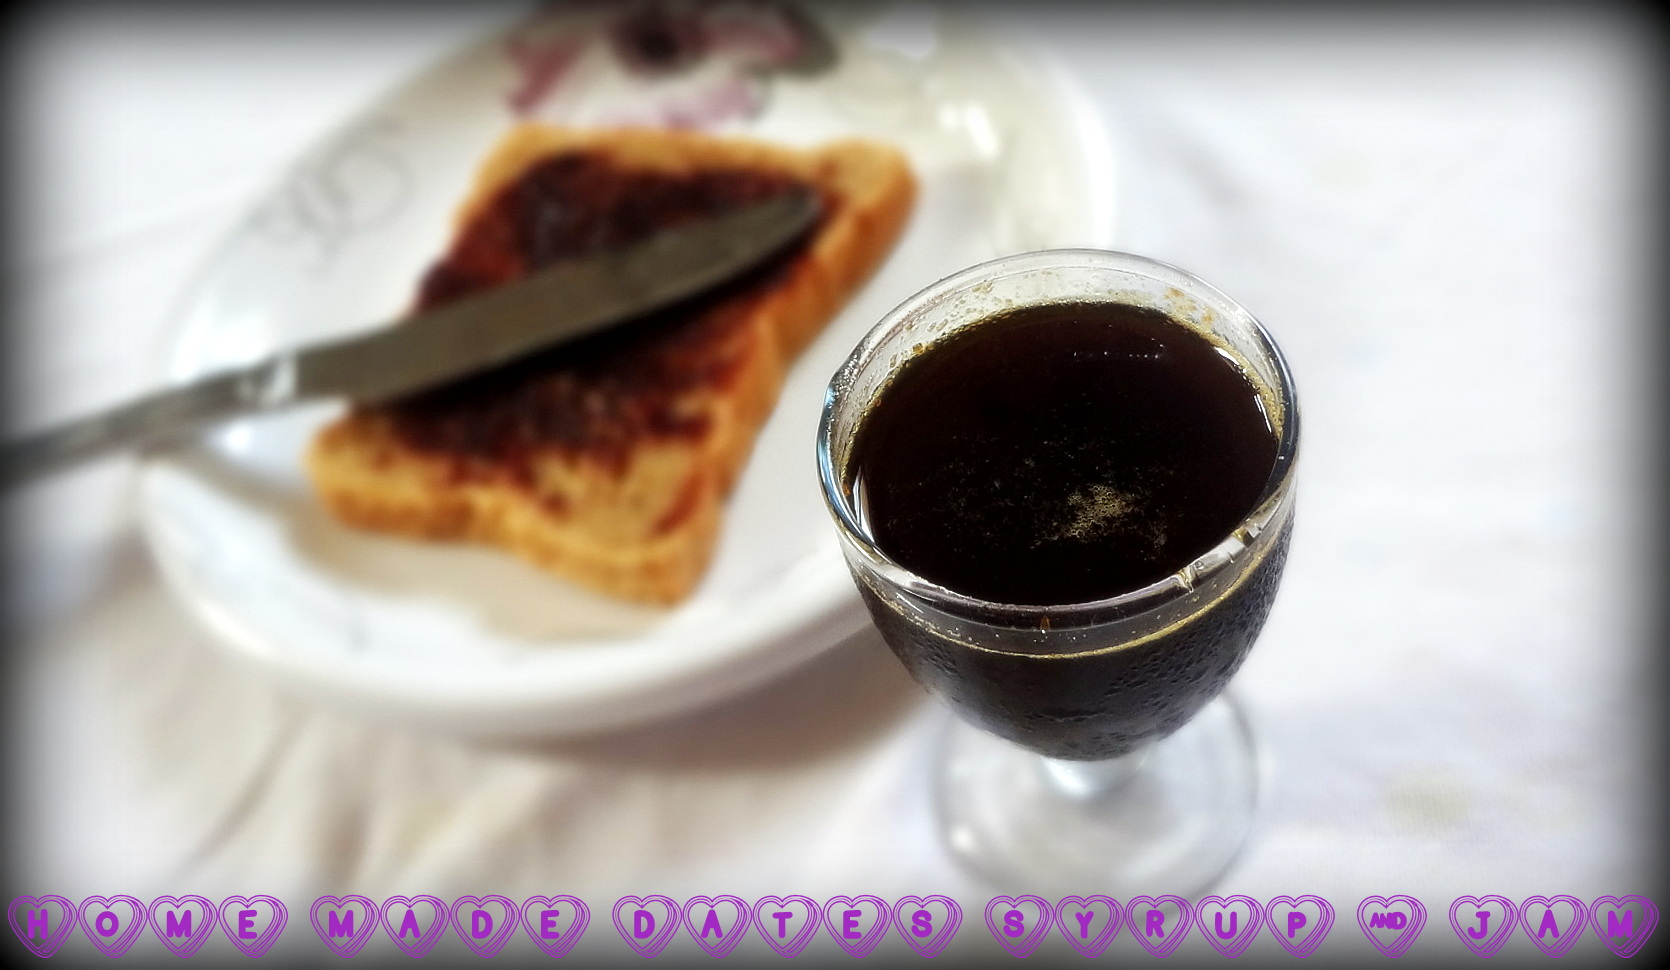 home made dates syrup and jam.JPG